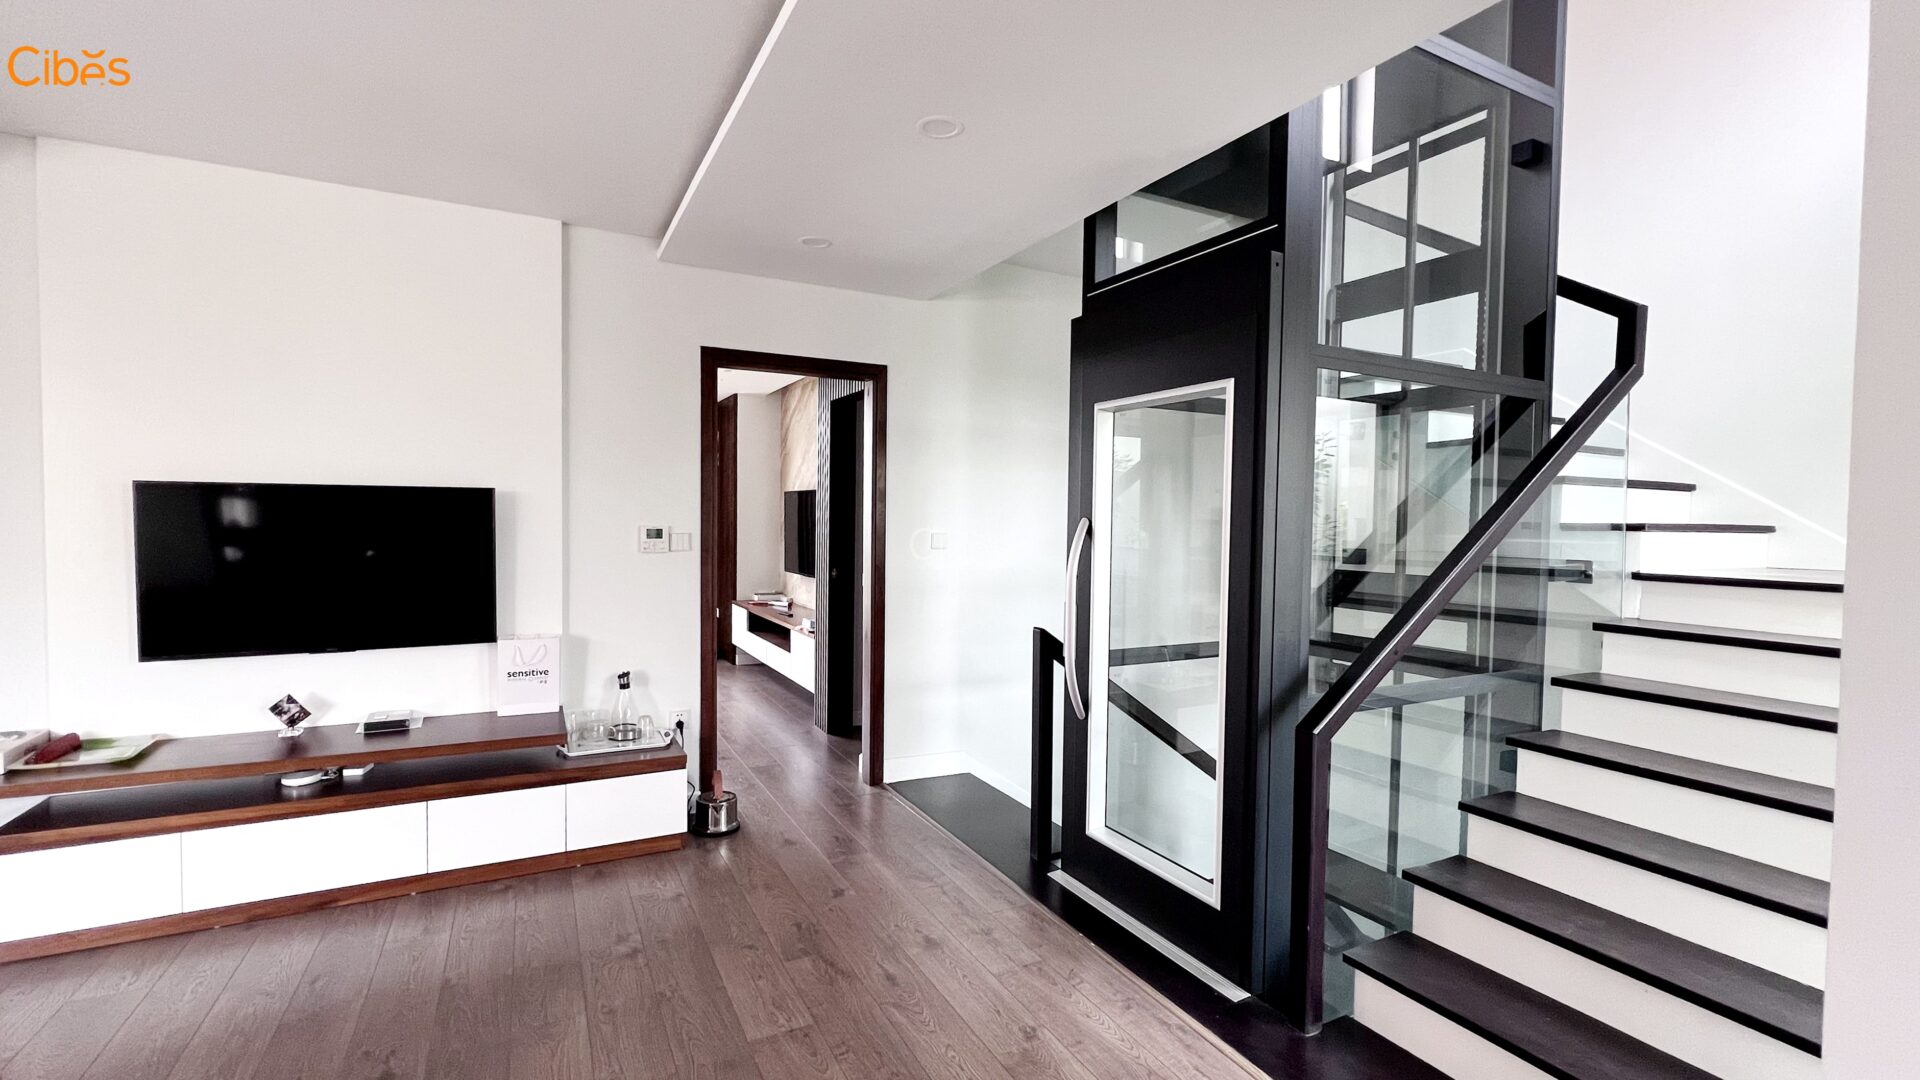 Lift installed in a luxury house at Vinhome Riverside Hanoi Vietnam 2 global projects Cibes Home Lift ลิฟท์บ้าน